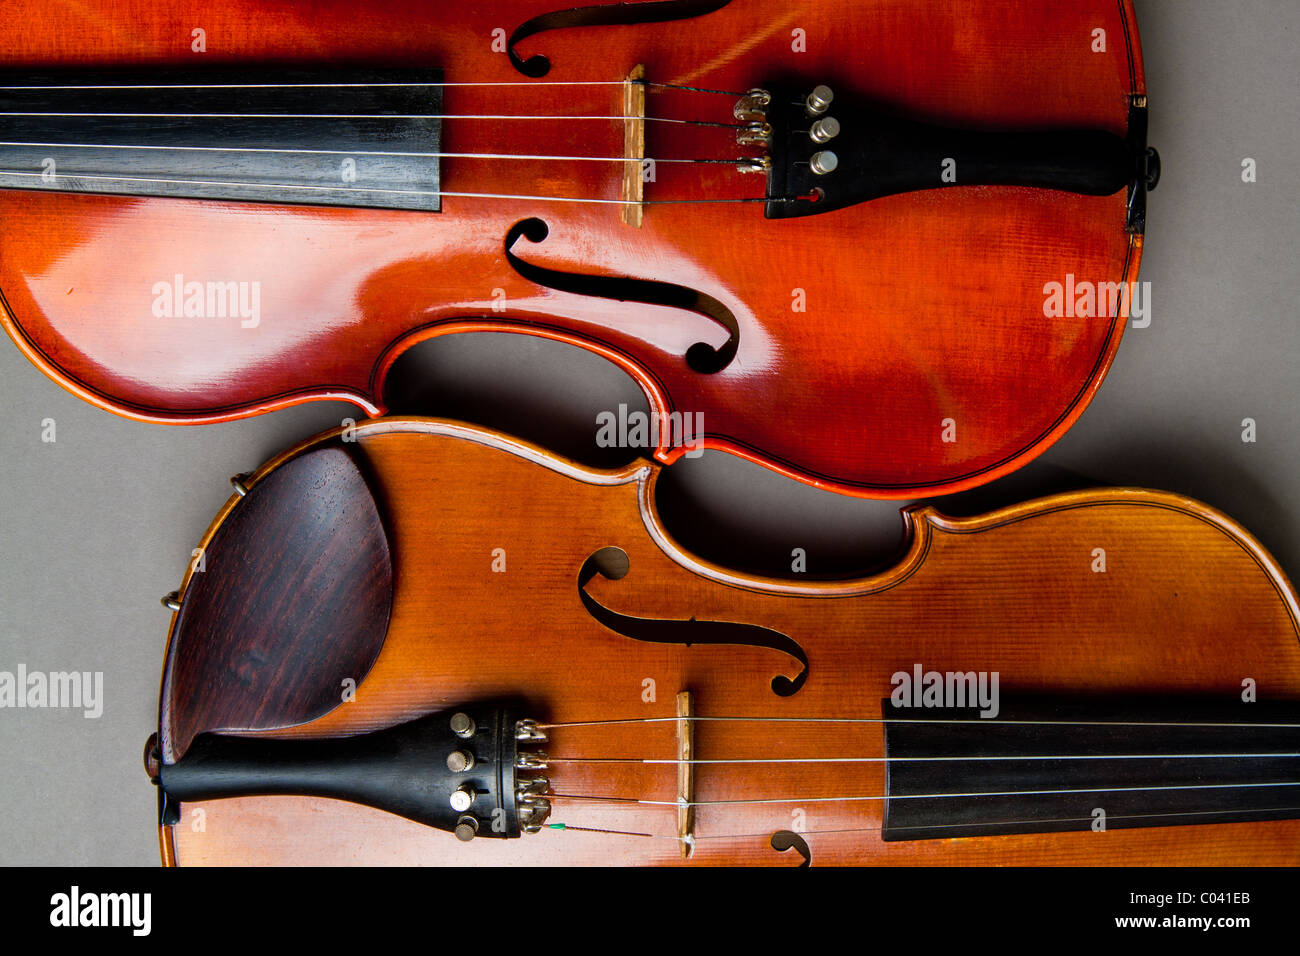 The 'C' bouts and f holes of two classical violins or fiddles on a grey background. Stock Photo